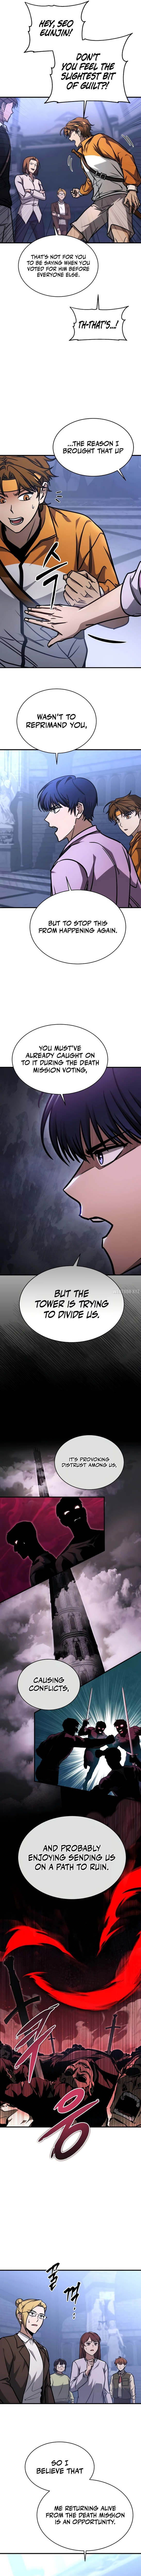 my-exclusive-tower-guide-chap-7-8